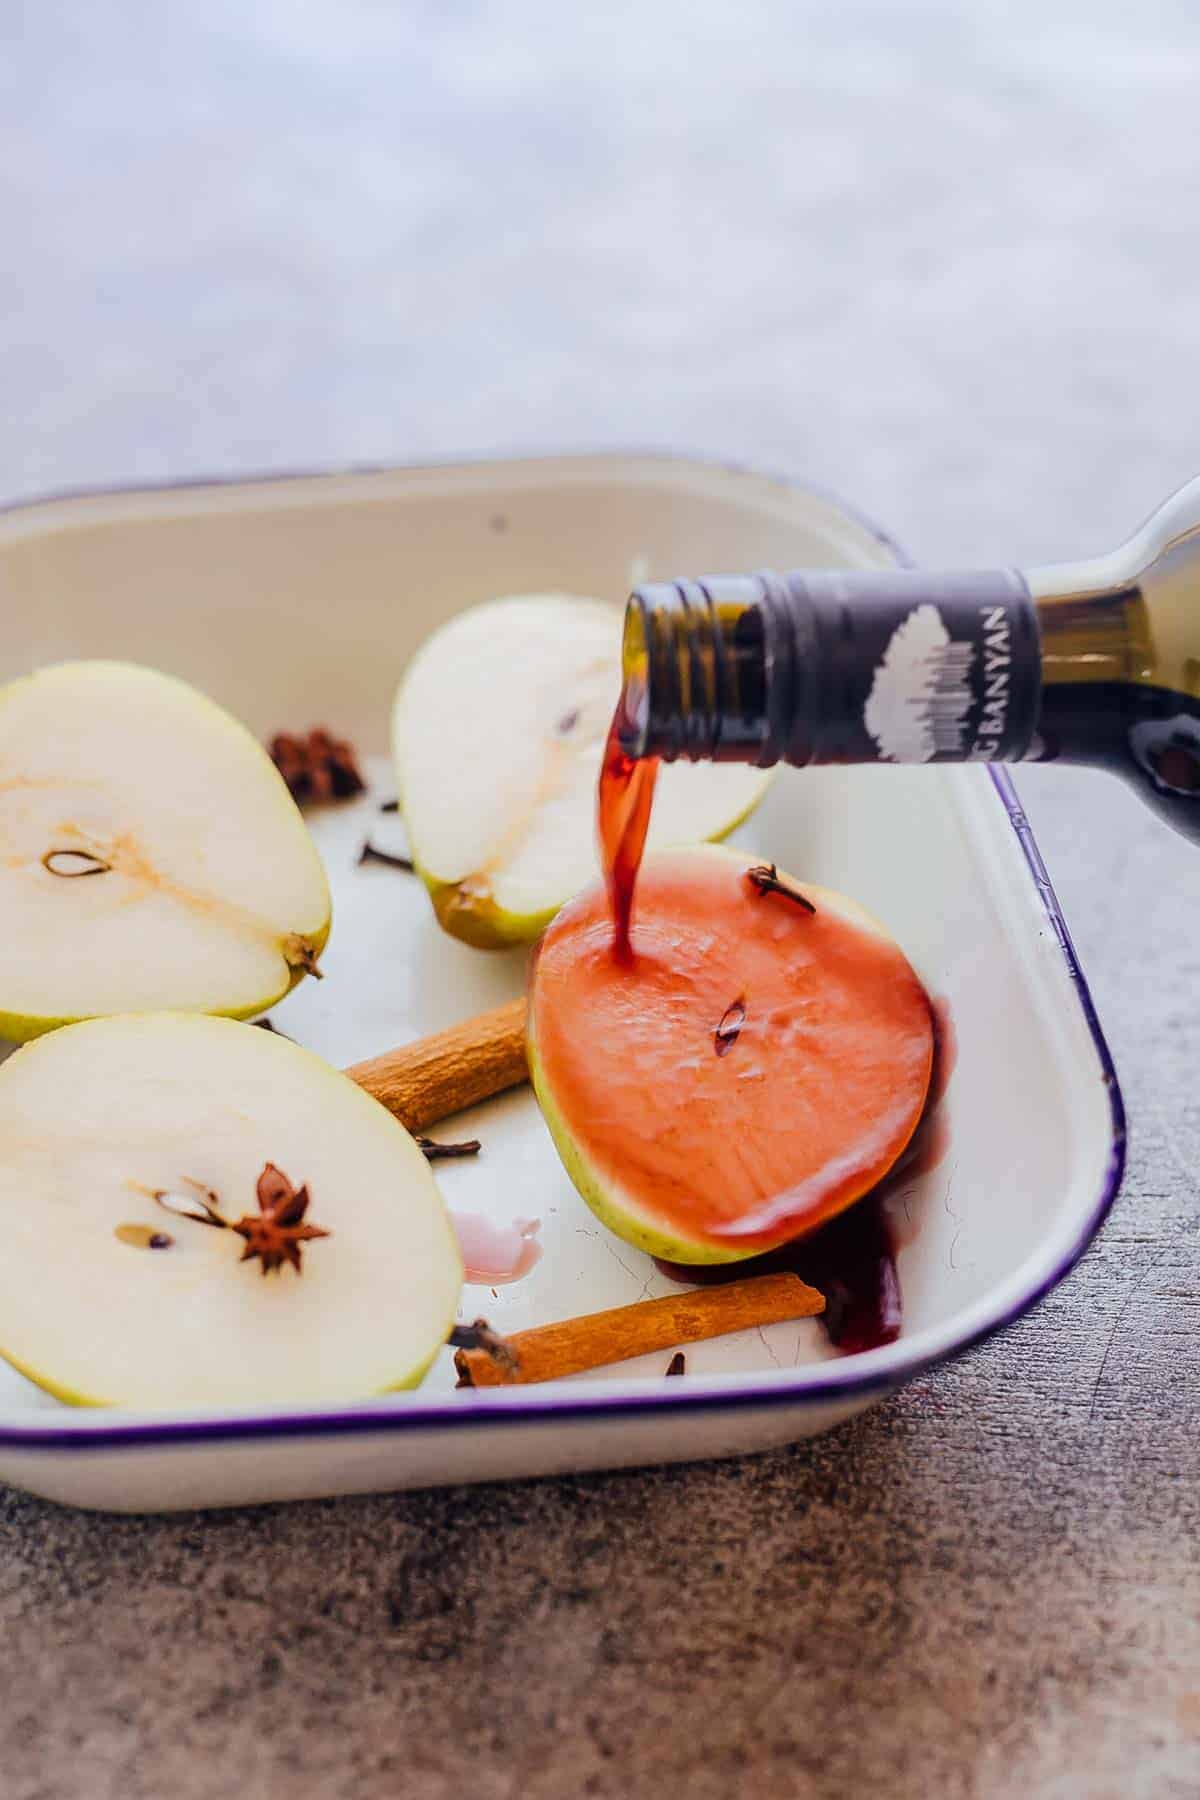 Cooking with wine by poaching pears in wine